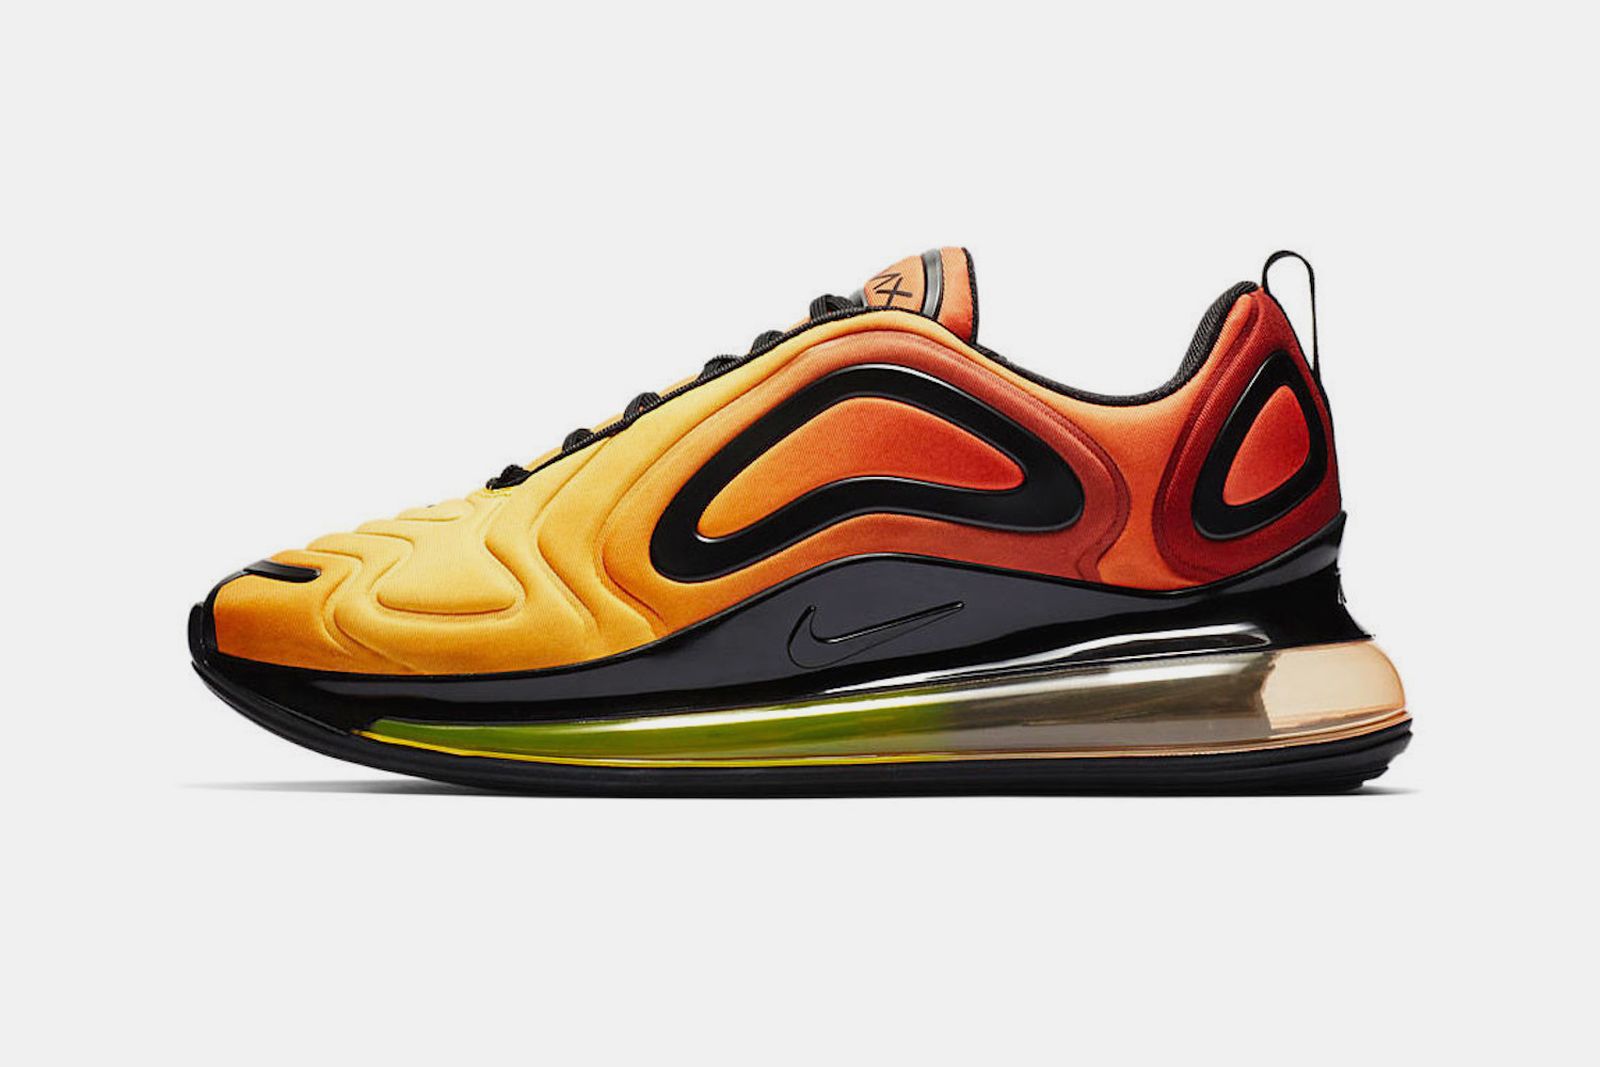 inrichting Rodeo fundament Nike Air Max 720 February 2019 Colorways: Where to Buy Tomorrow